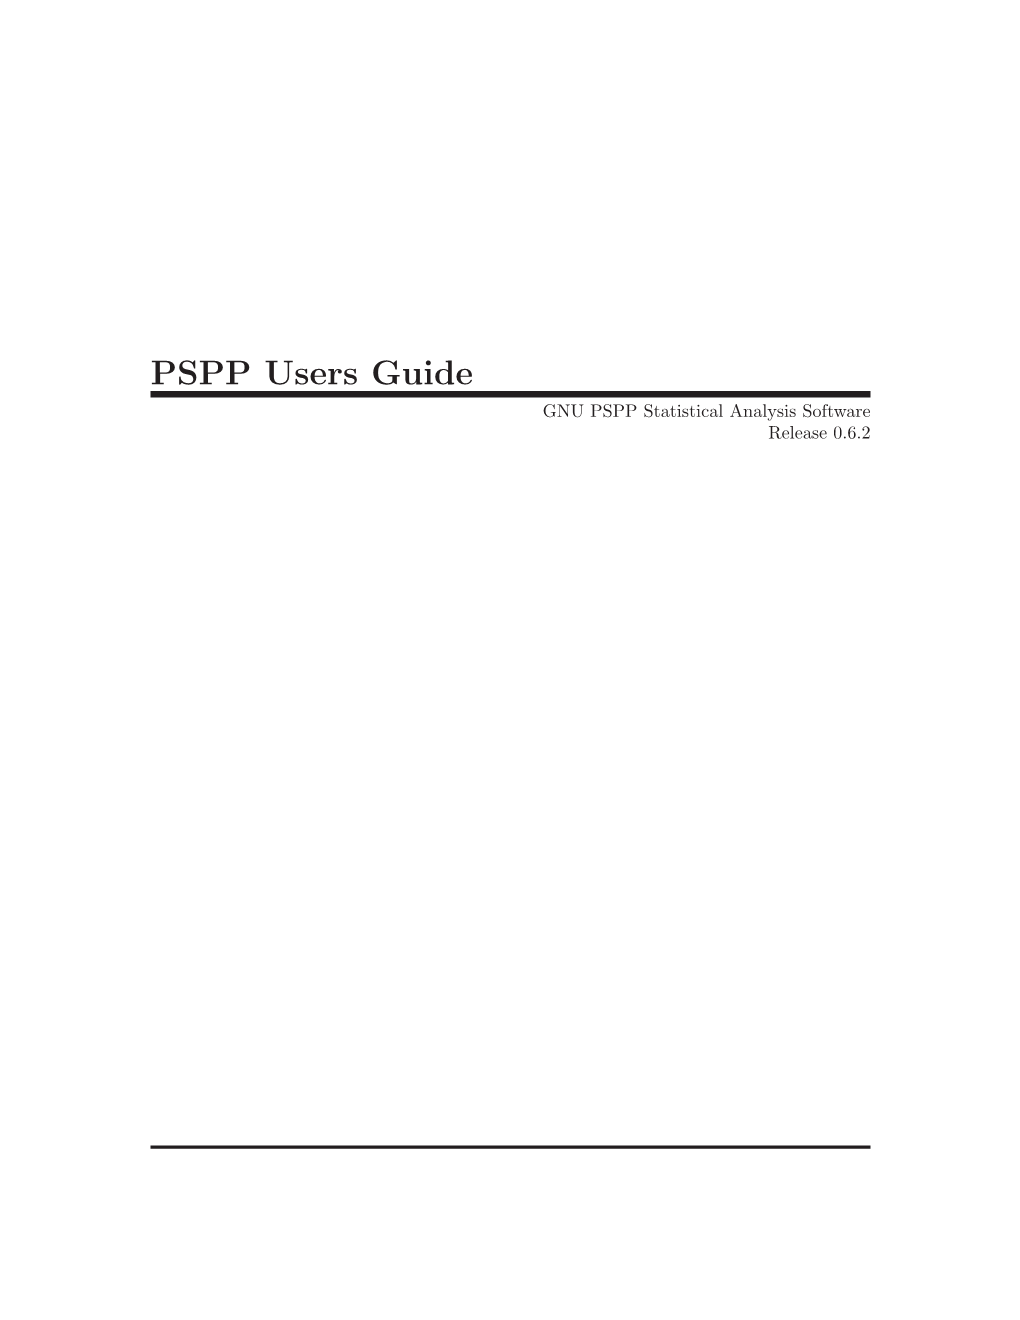 PSPP Users Guide GNU PSPP Statistical Analysis Software Release 0.6.2 This Manual Is for GNU PSPP Version 0.6.2, Software for Statistical Analysis